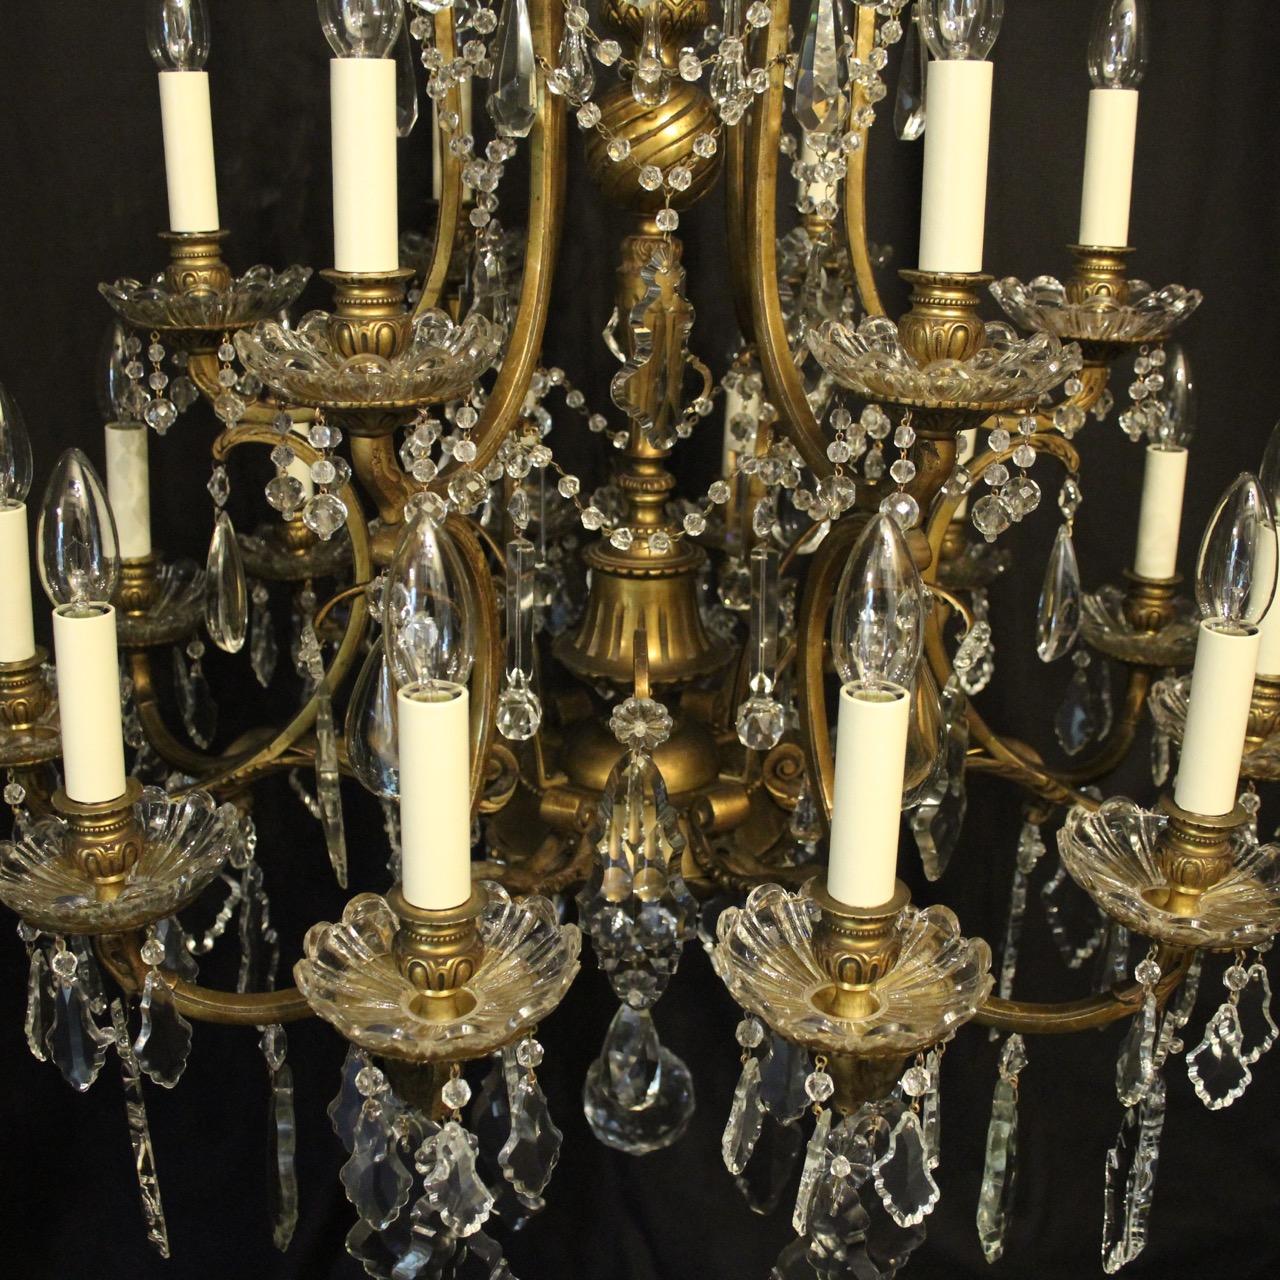 French Late 19th Century Bronze and Crystal 18-Light Chandelier im Zustand „Gut“ im Angebot in Chester, GB